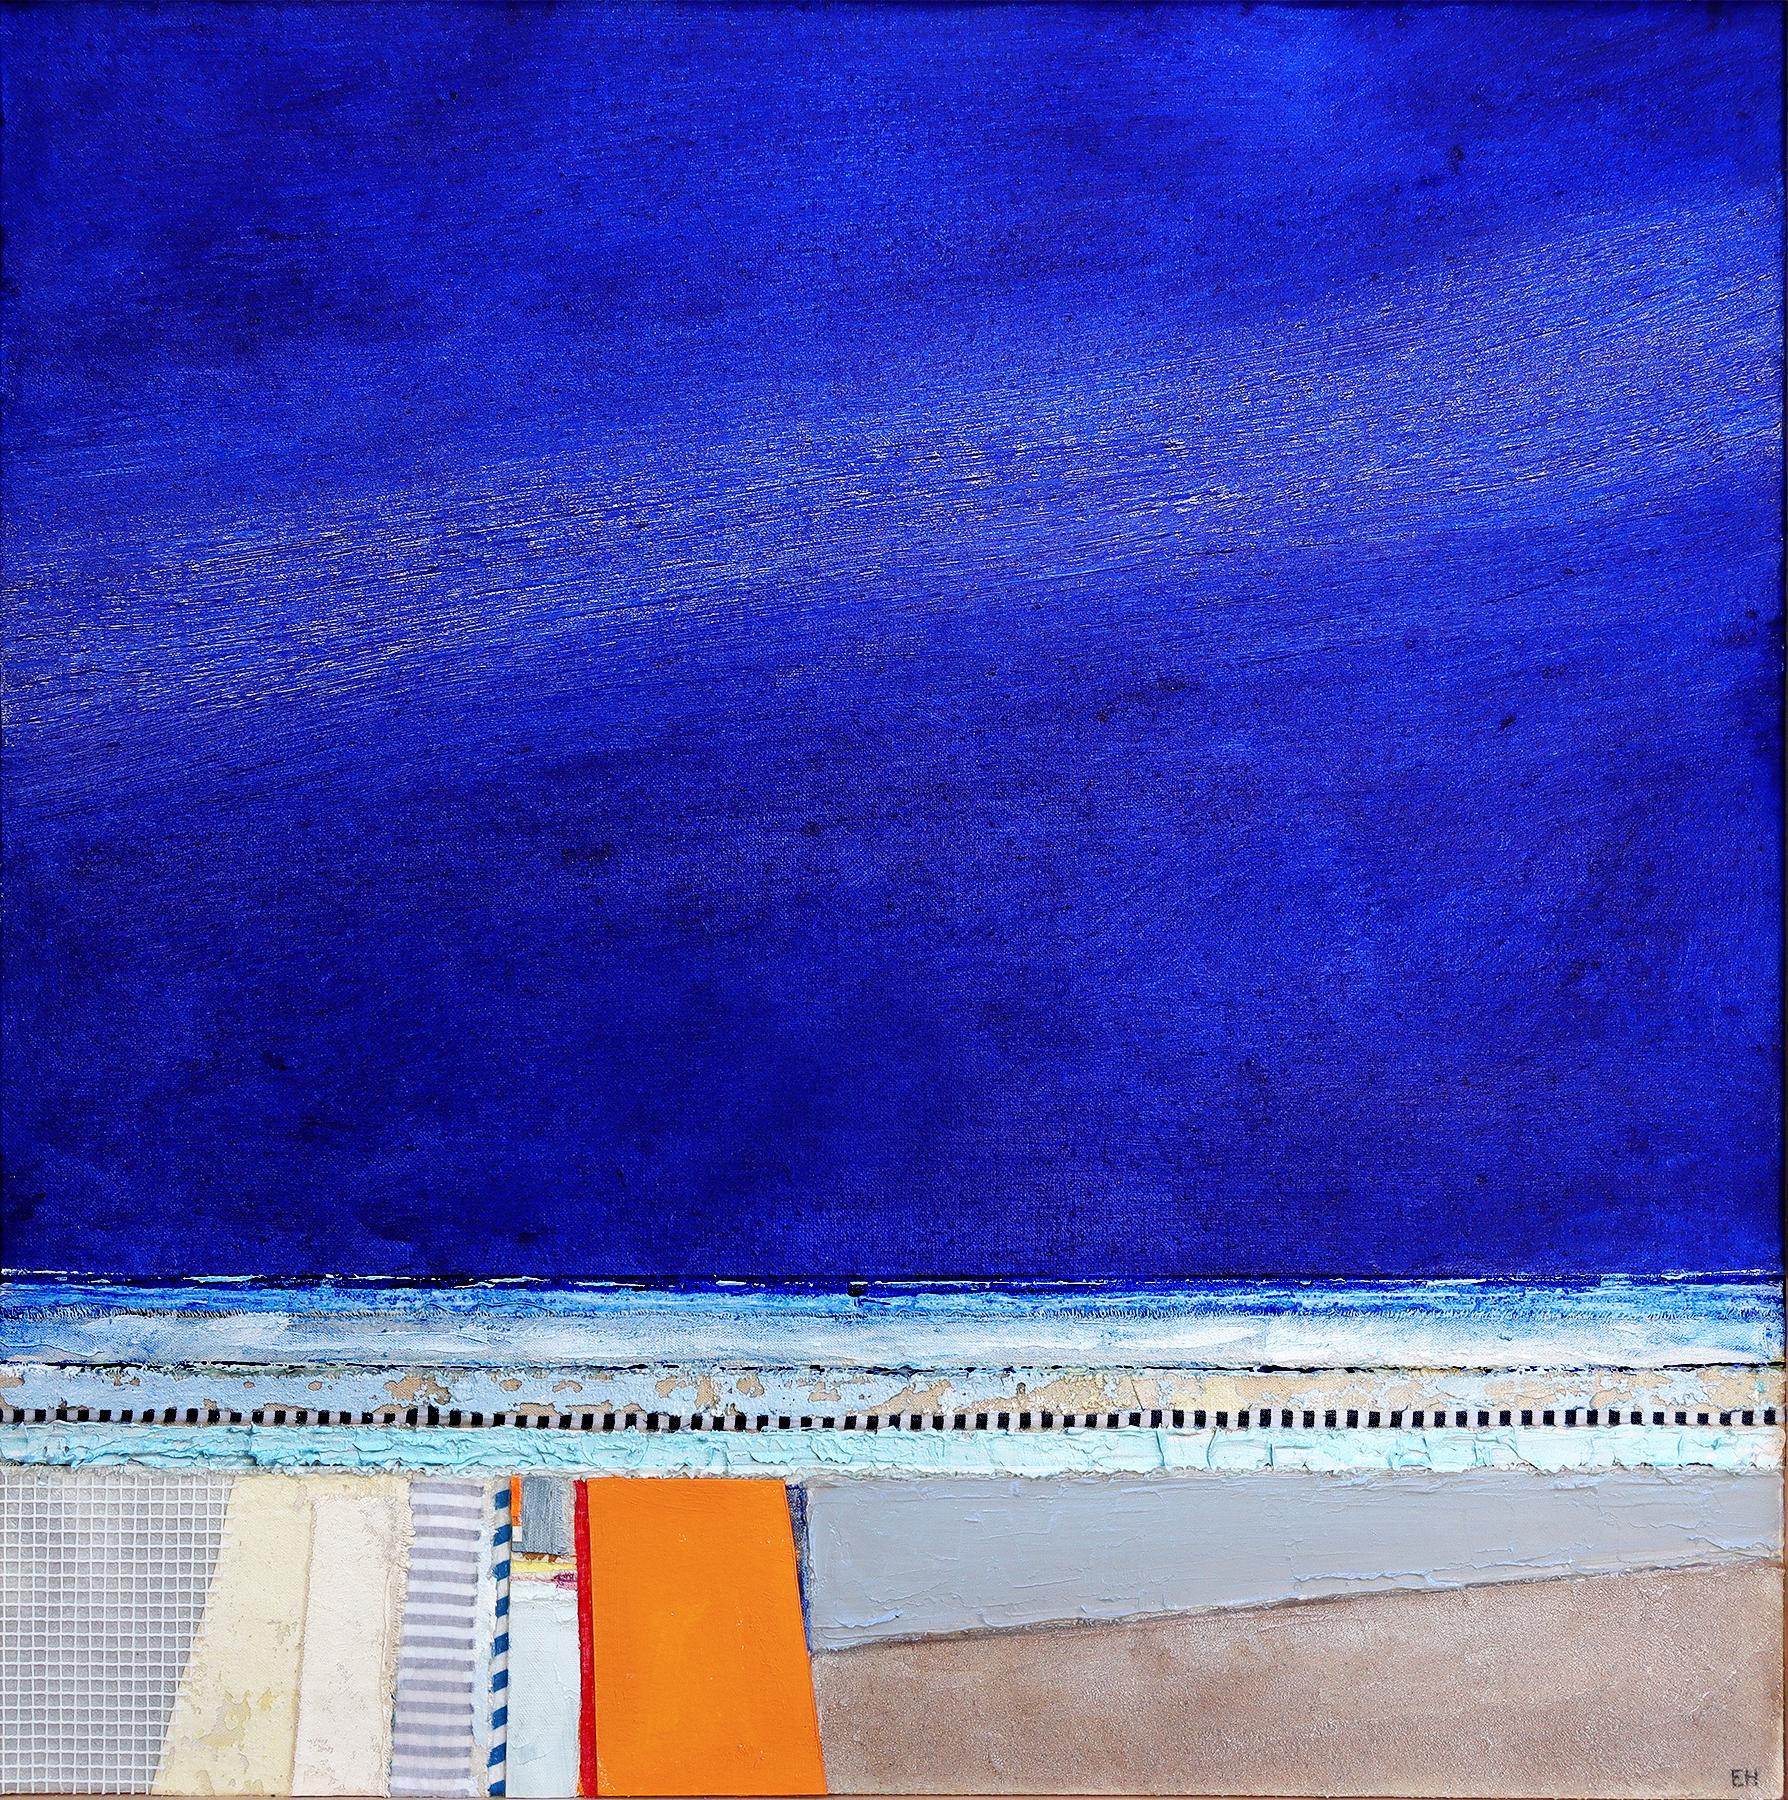 Available at Madelyn Jordon Fine Art. 'The Boardwalk' by Eugene Healy, 2022. Oil and mixed media on canvas, 30 x 30 in. This landscape painting features an abstracted seascape with land, sea, and sky and the artist incorporates sections of texture